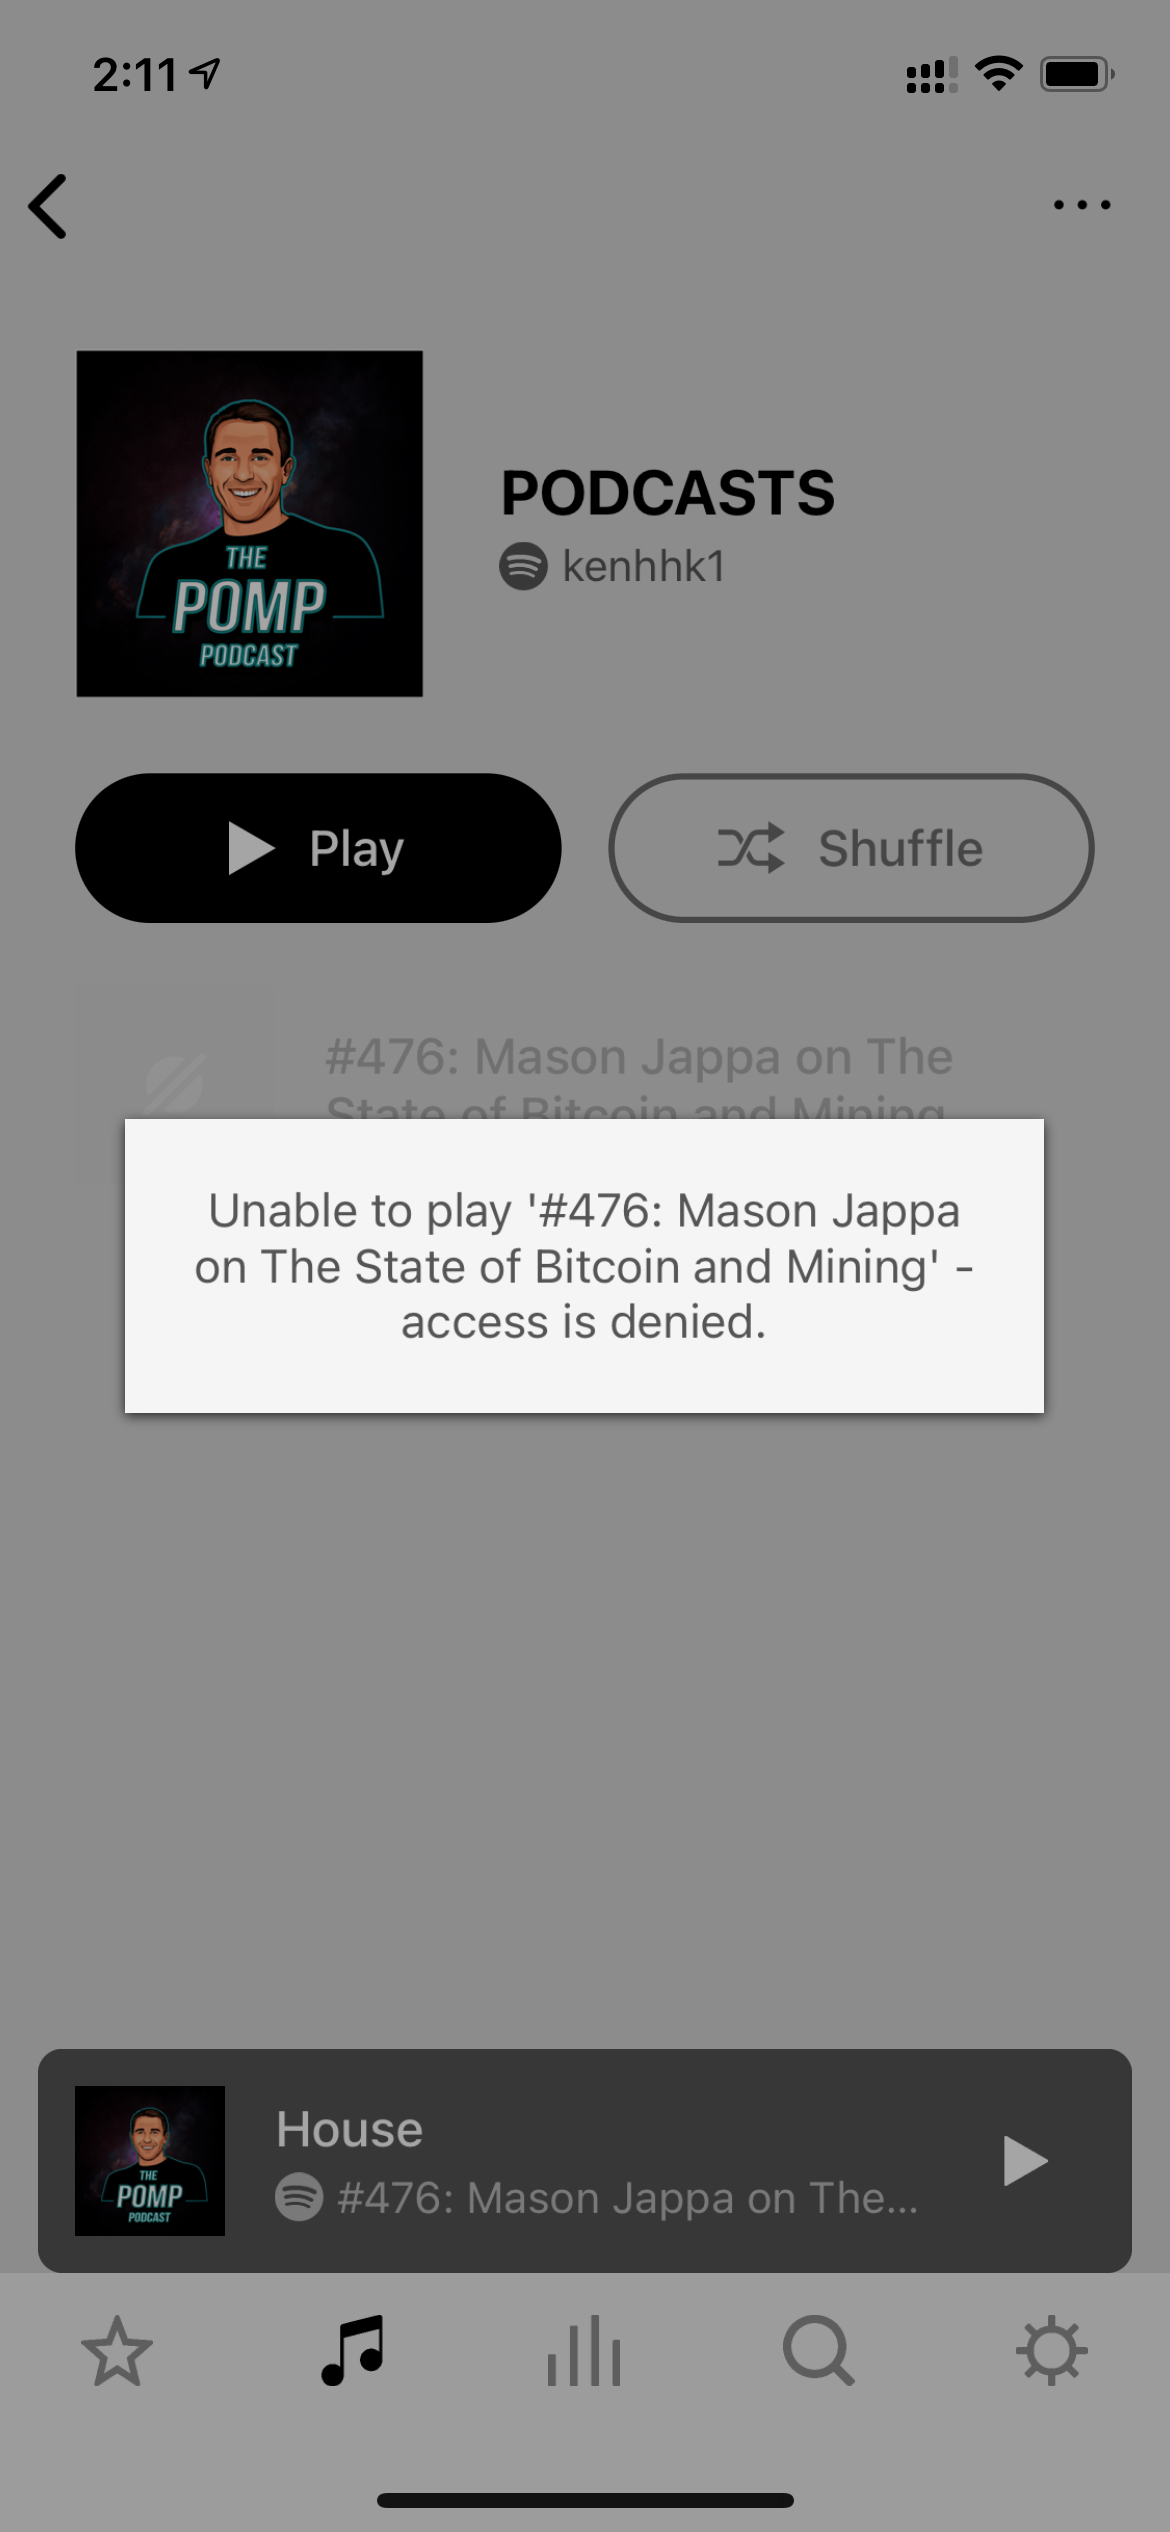 Encommium Whitney vaccination Can't play saved podcast, it shows in app but greyed out | Sonos Community